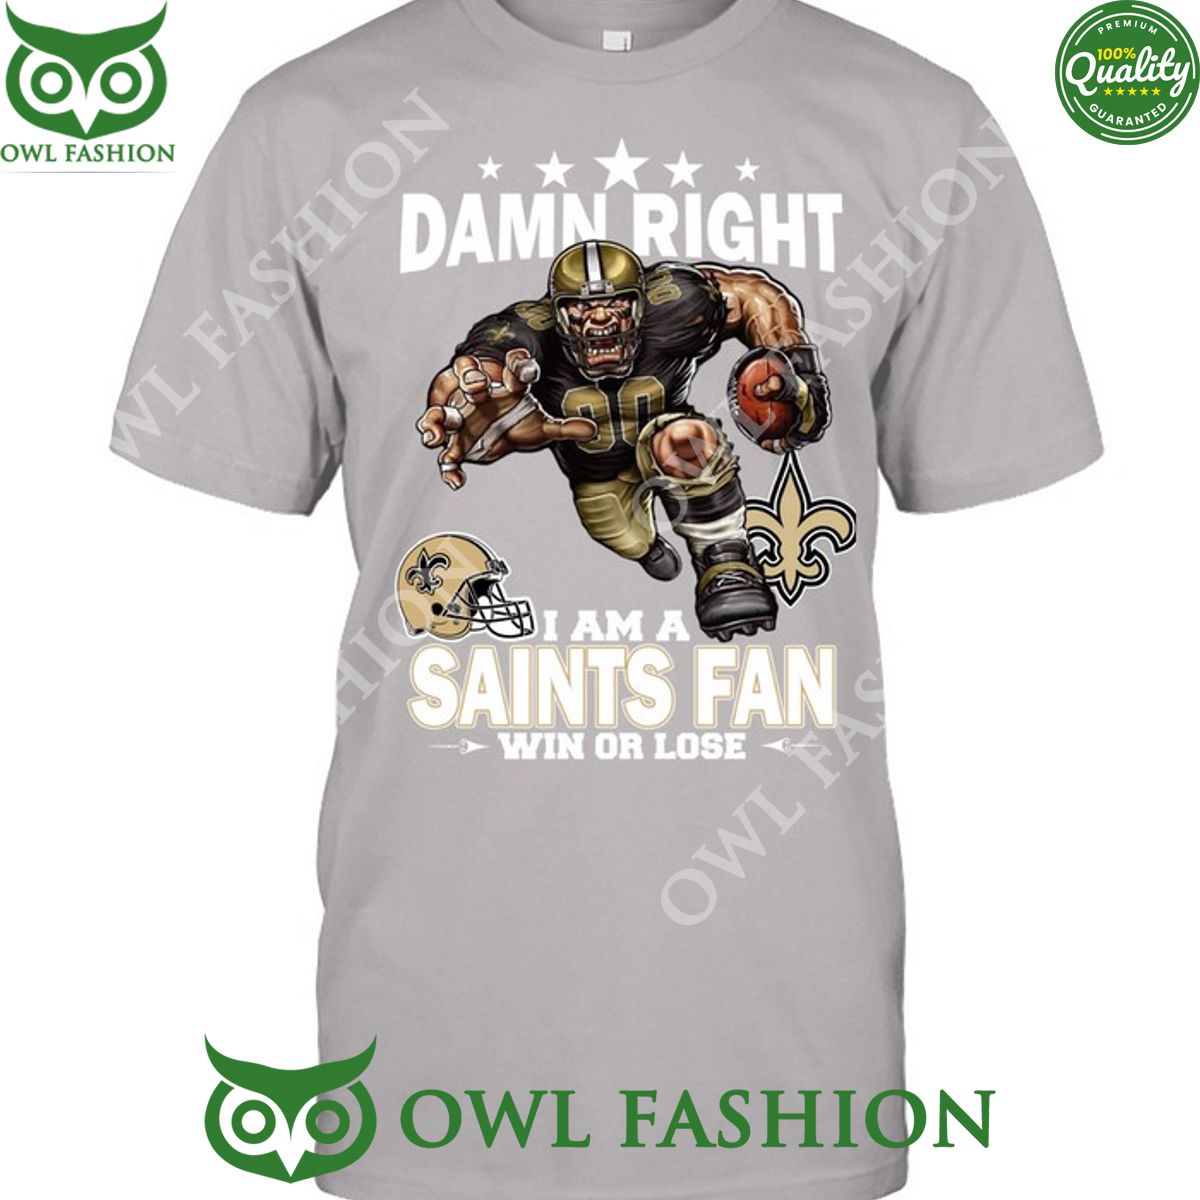 Damn Right New Orleans Saints NFL Fan Win or lose t shirt